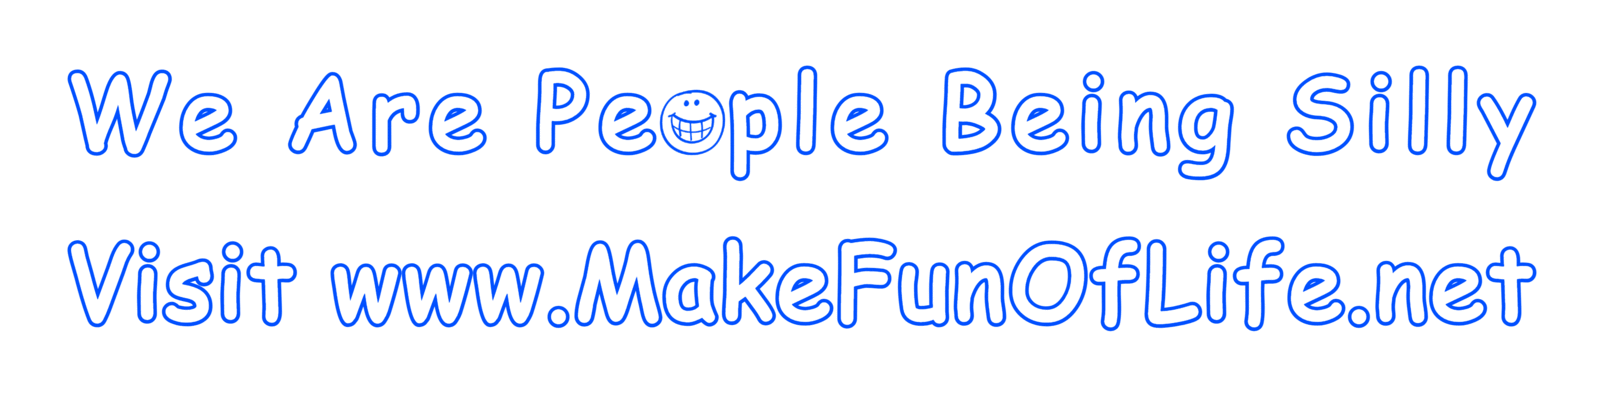 Words, ‘We Are People Being Silly,’ with a smiley face in place of the letter ‘o’ in the word people.